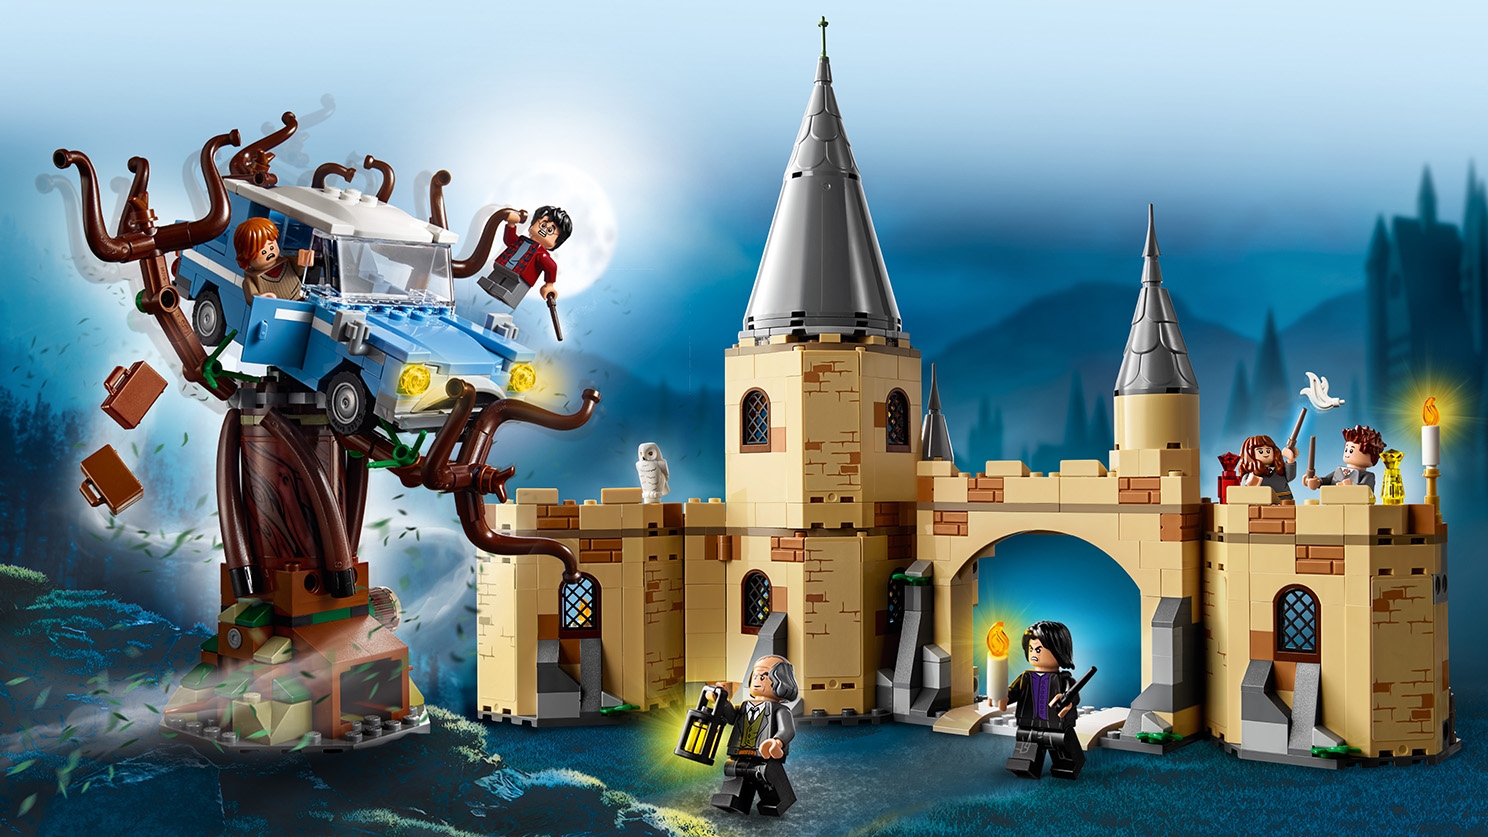 Hogwarts™ Whomping Willow™ 75953 LEGO® Harry Potter™ and Fantastic Beasts™ Sets - LEGO.com kids